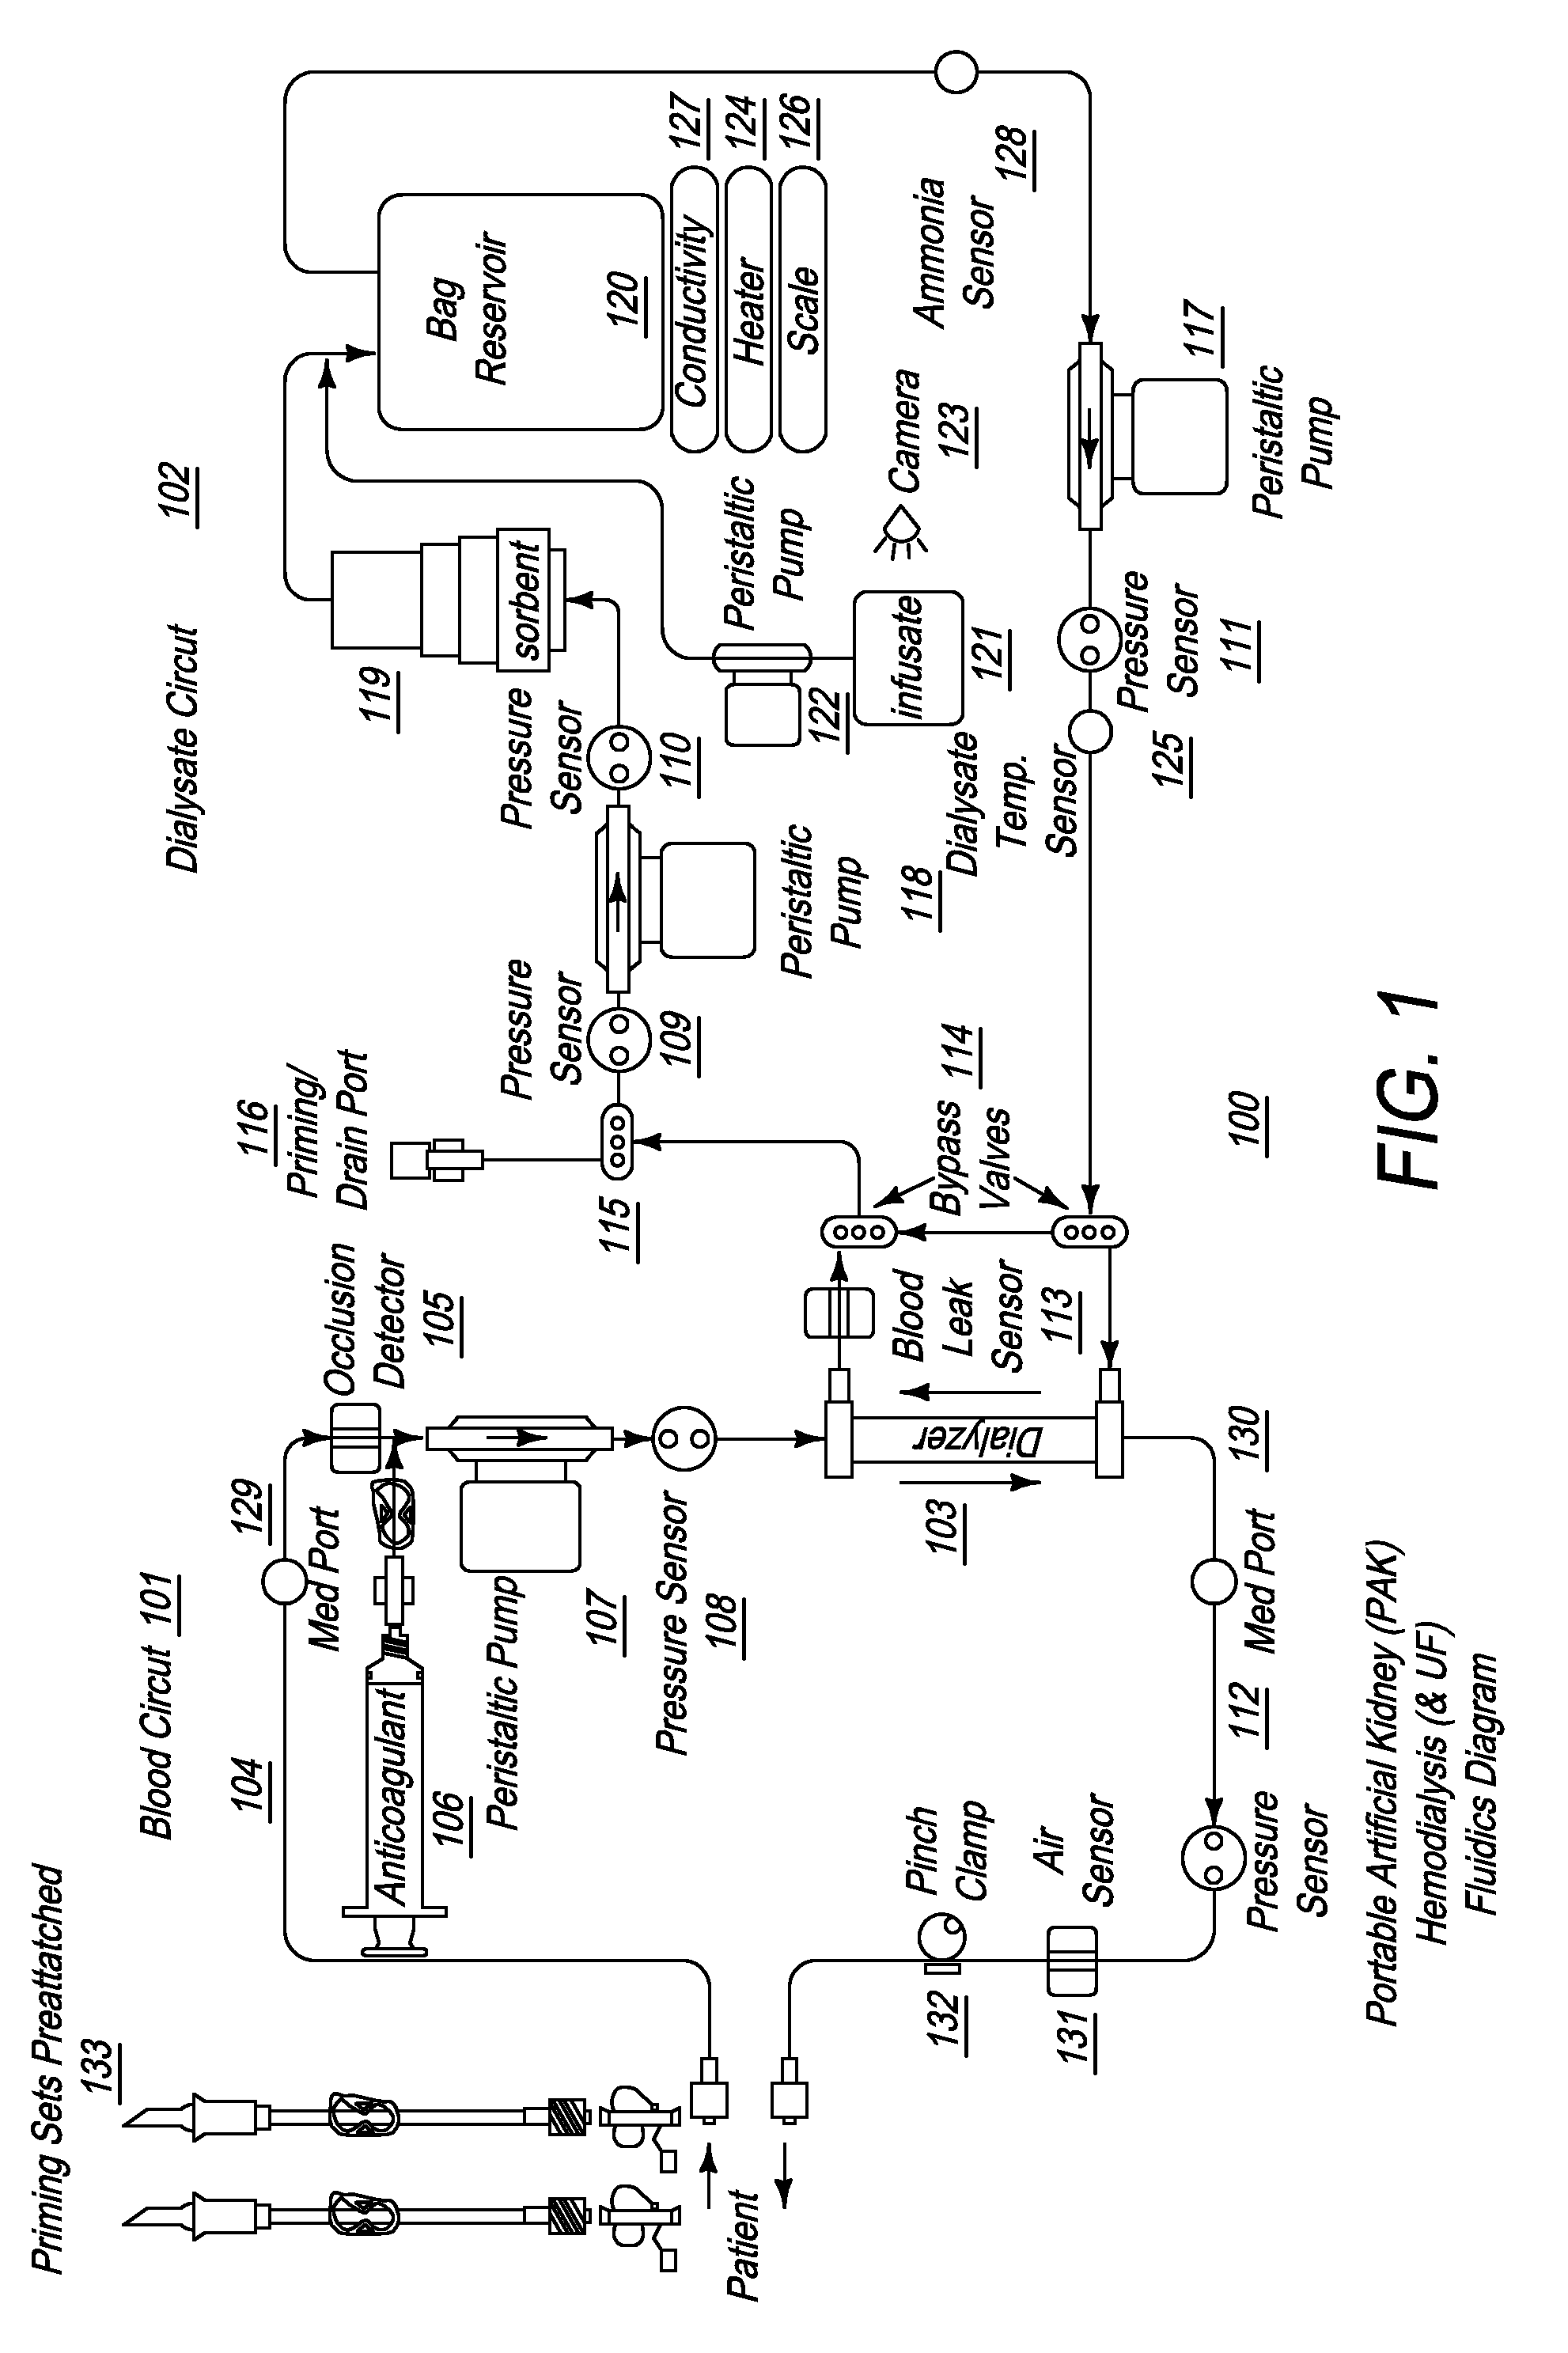 Priming System and Method for Dialysis Systems